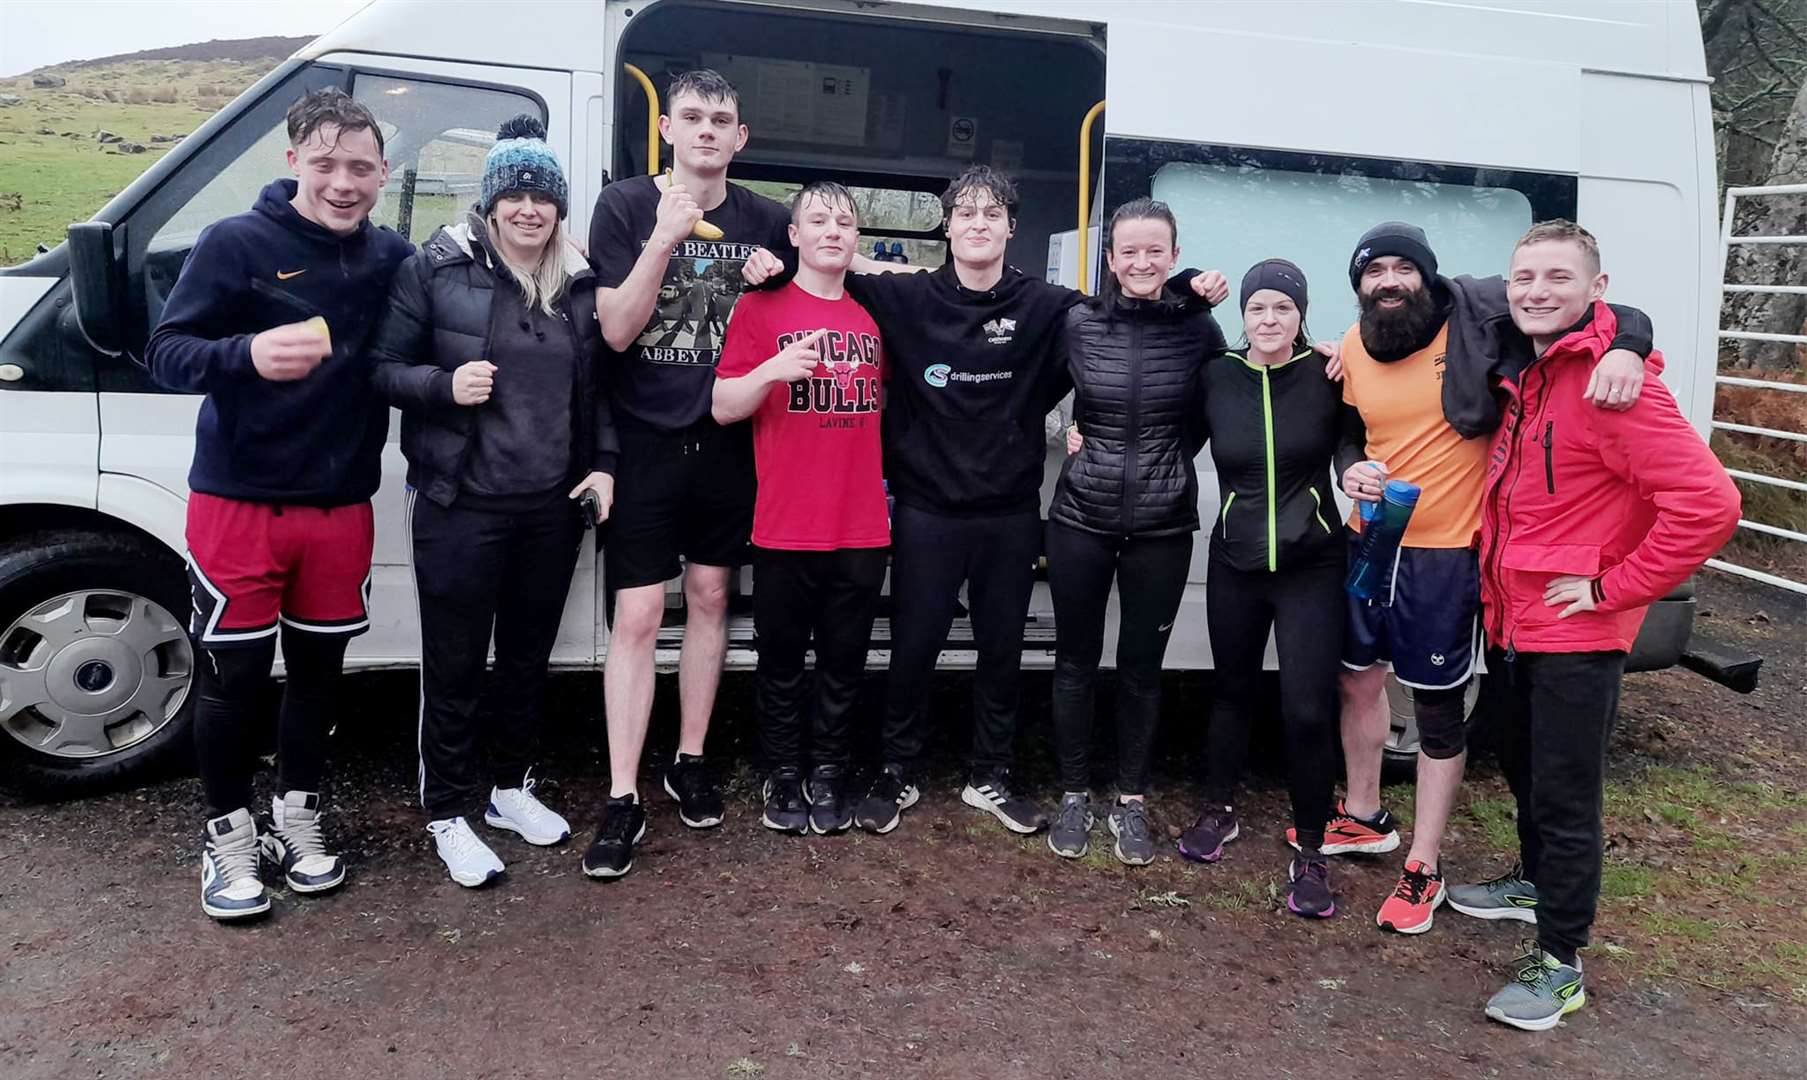 From left: Harry Whitworth, Lisa Robertson (coach), Aaron Sinclair, Koby Stewart, Nathan Tait, Mary MacGillivray, Sam Mackechnie, Andy Sinclair and Cailean Fraser (coach) after this month's Berriedale 10k fundraiser.